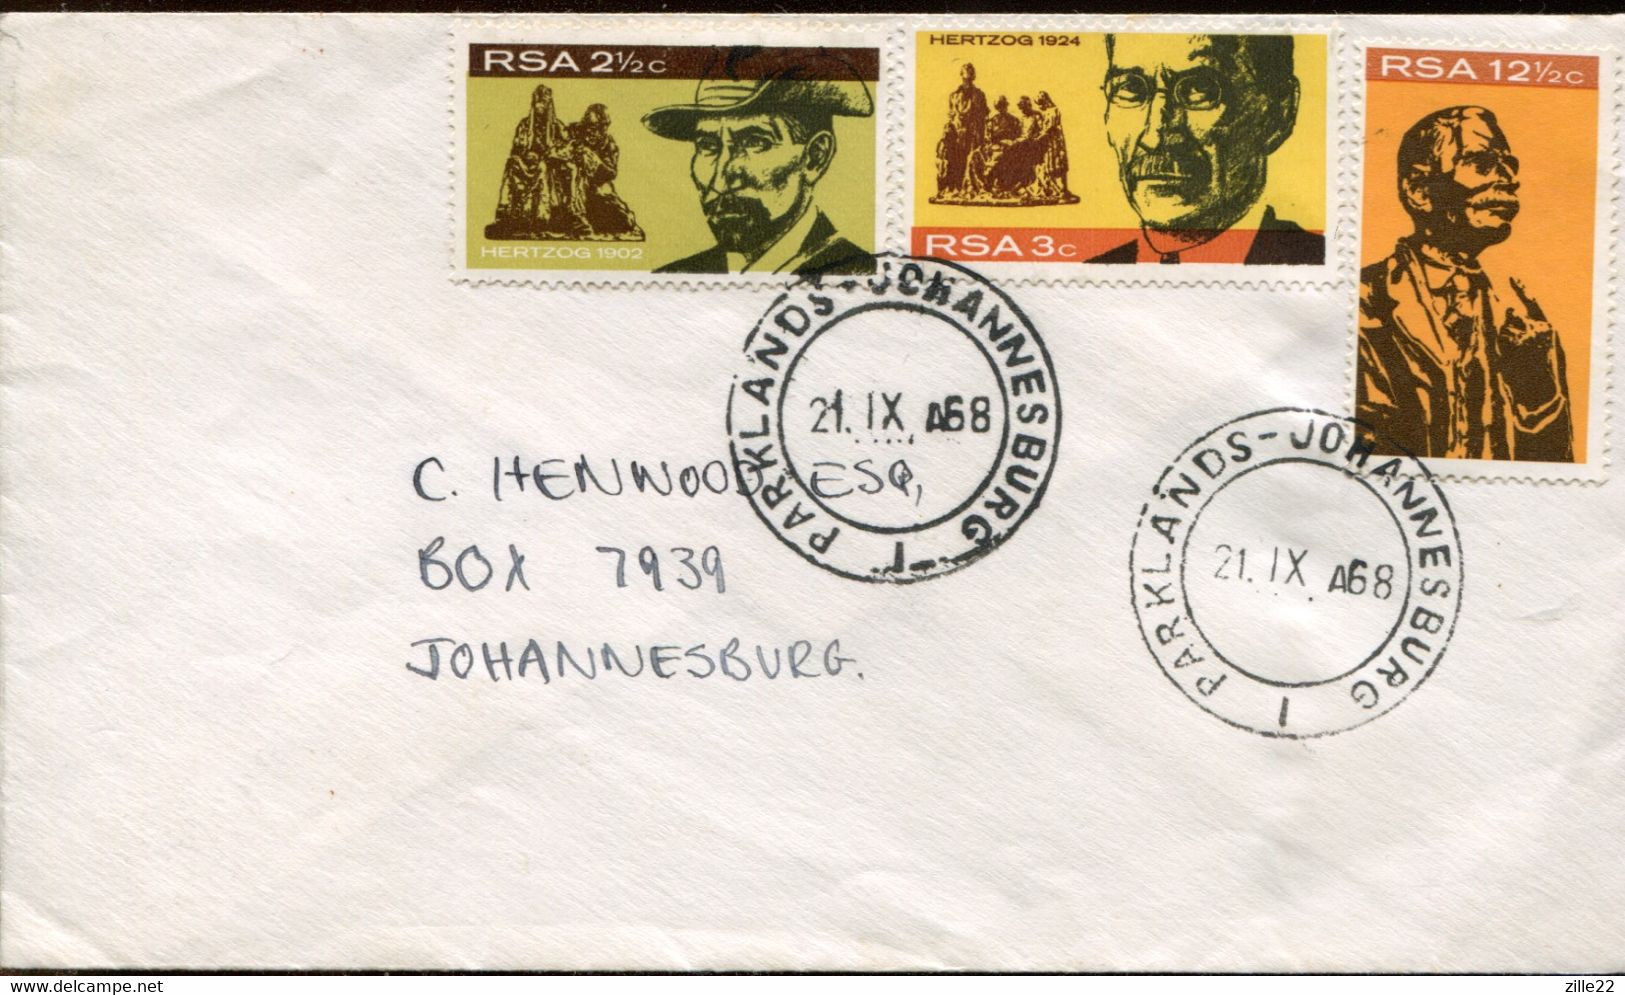 RSA - Republik Südafrika - FDC Addressed Or Special Cover Or Card - Mi# 375-7 - Civil War General Monument - Covers & Documents